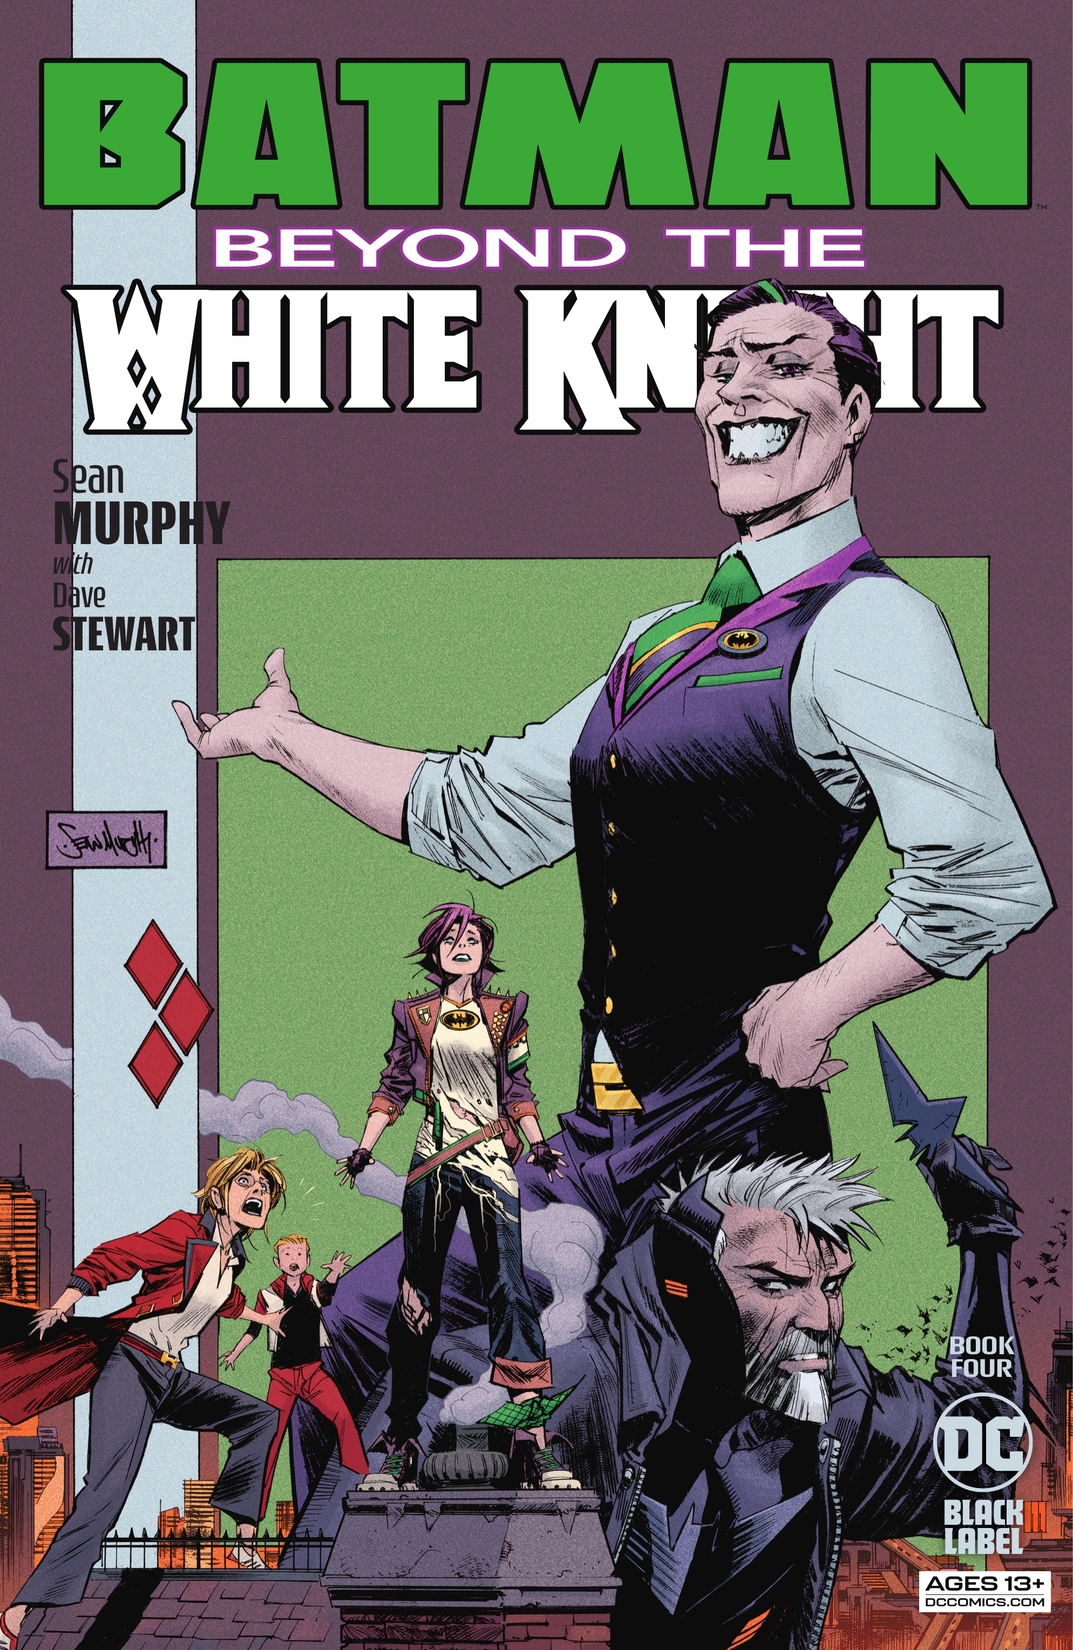 Batman: Beyond the White Knight #4 preview images